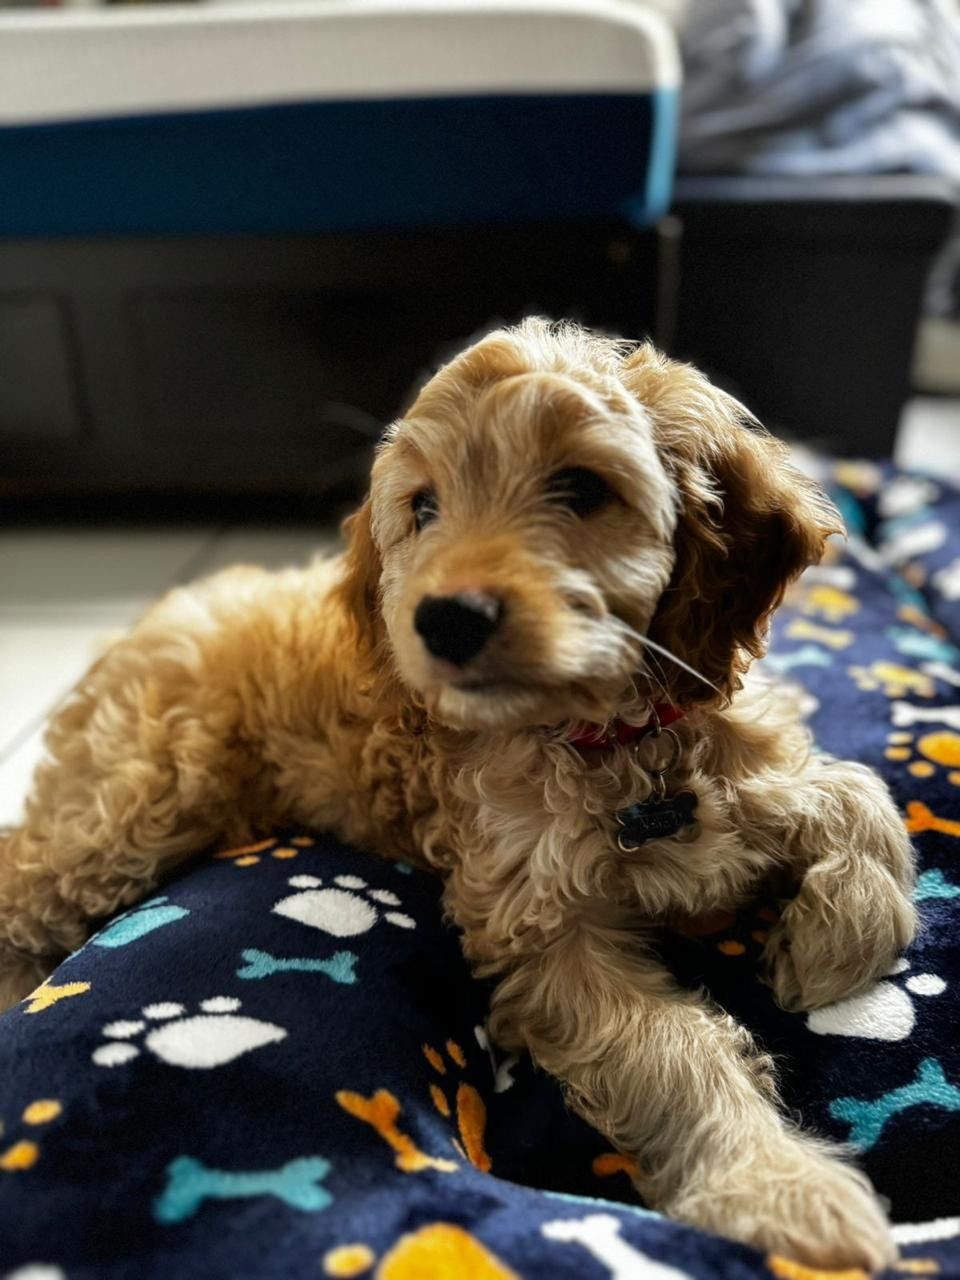 canine, dog, domestic animals, pet, mammal, animal themes, one animal, animal, puppy, cockapoo, lap dog, cute, indoors, no people, young animal, carnivore, relaxation, portrait, animal hair